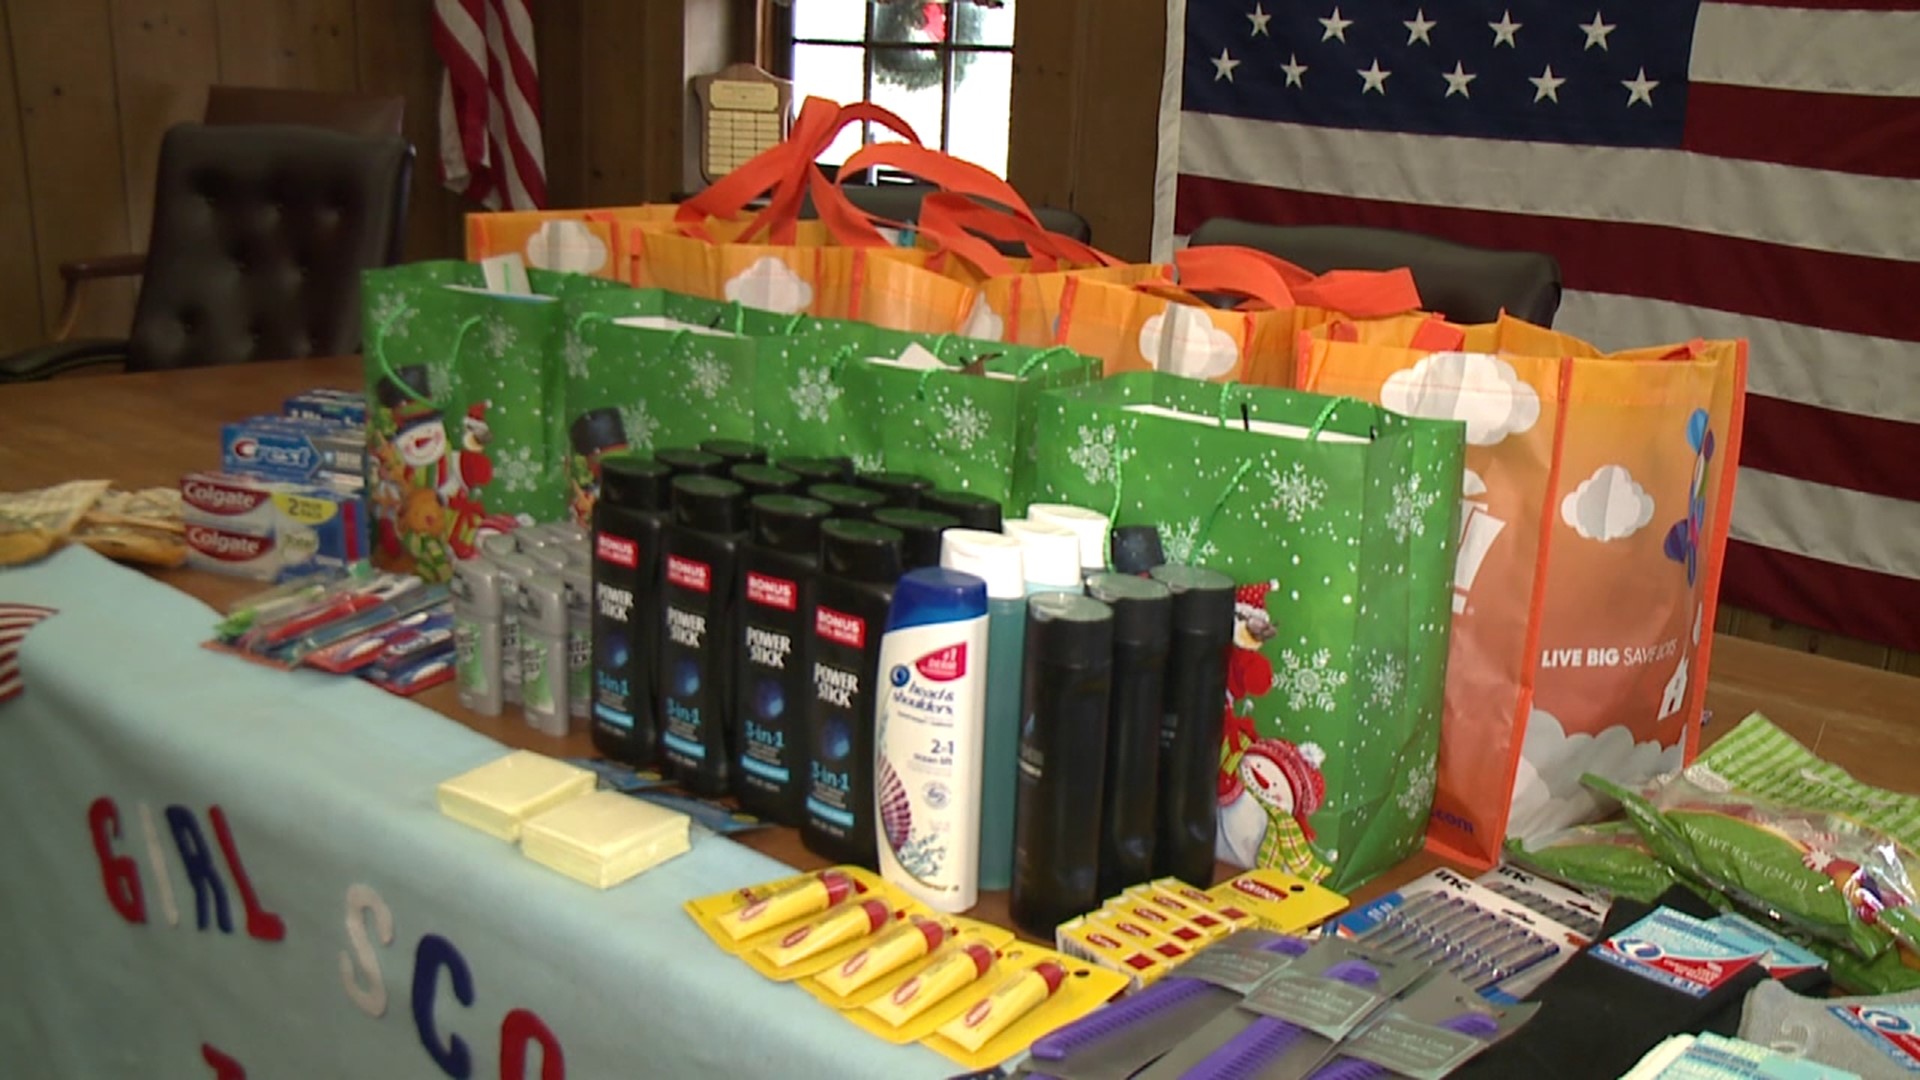 The scouts collected a variety of donations for veterans at the VA Medical Center in Plains Township.